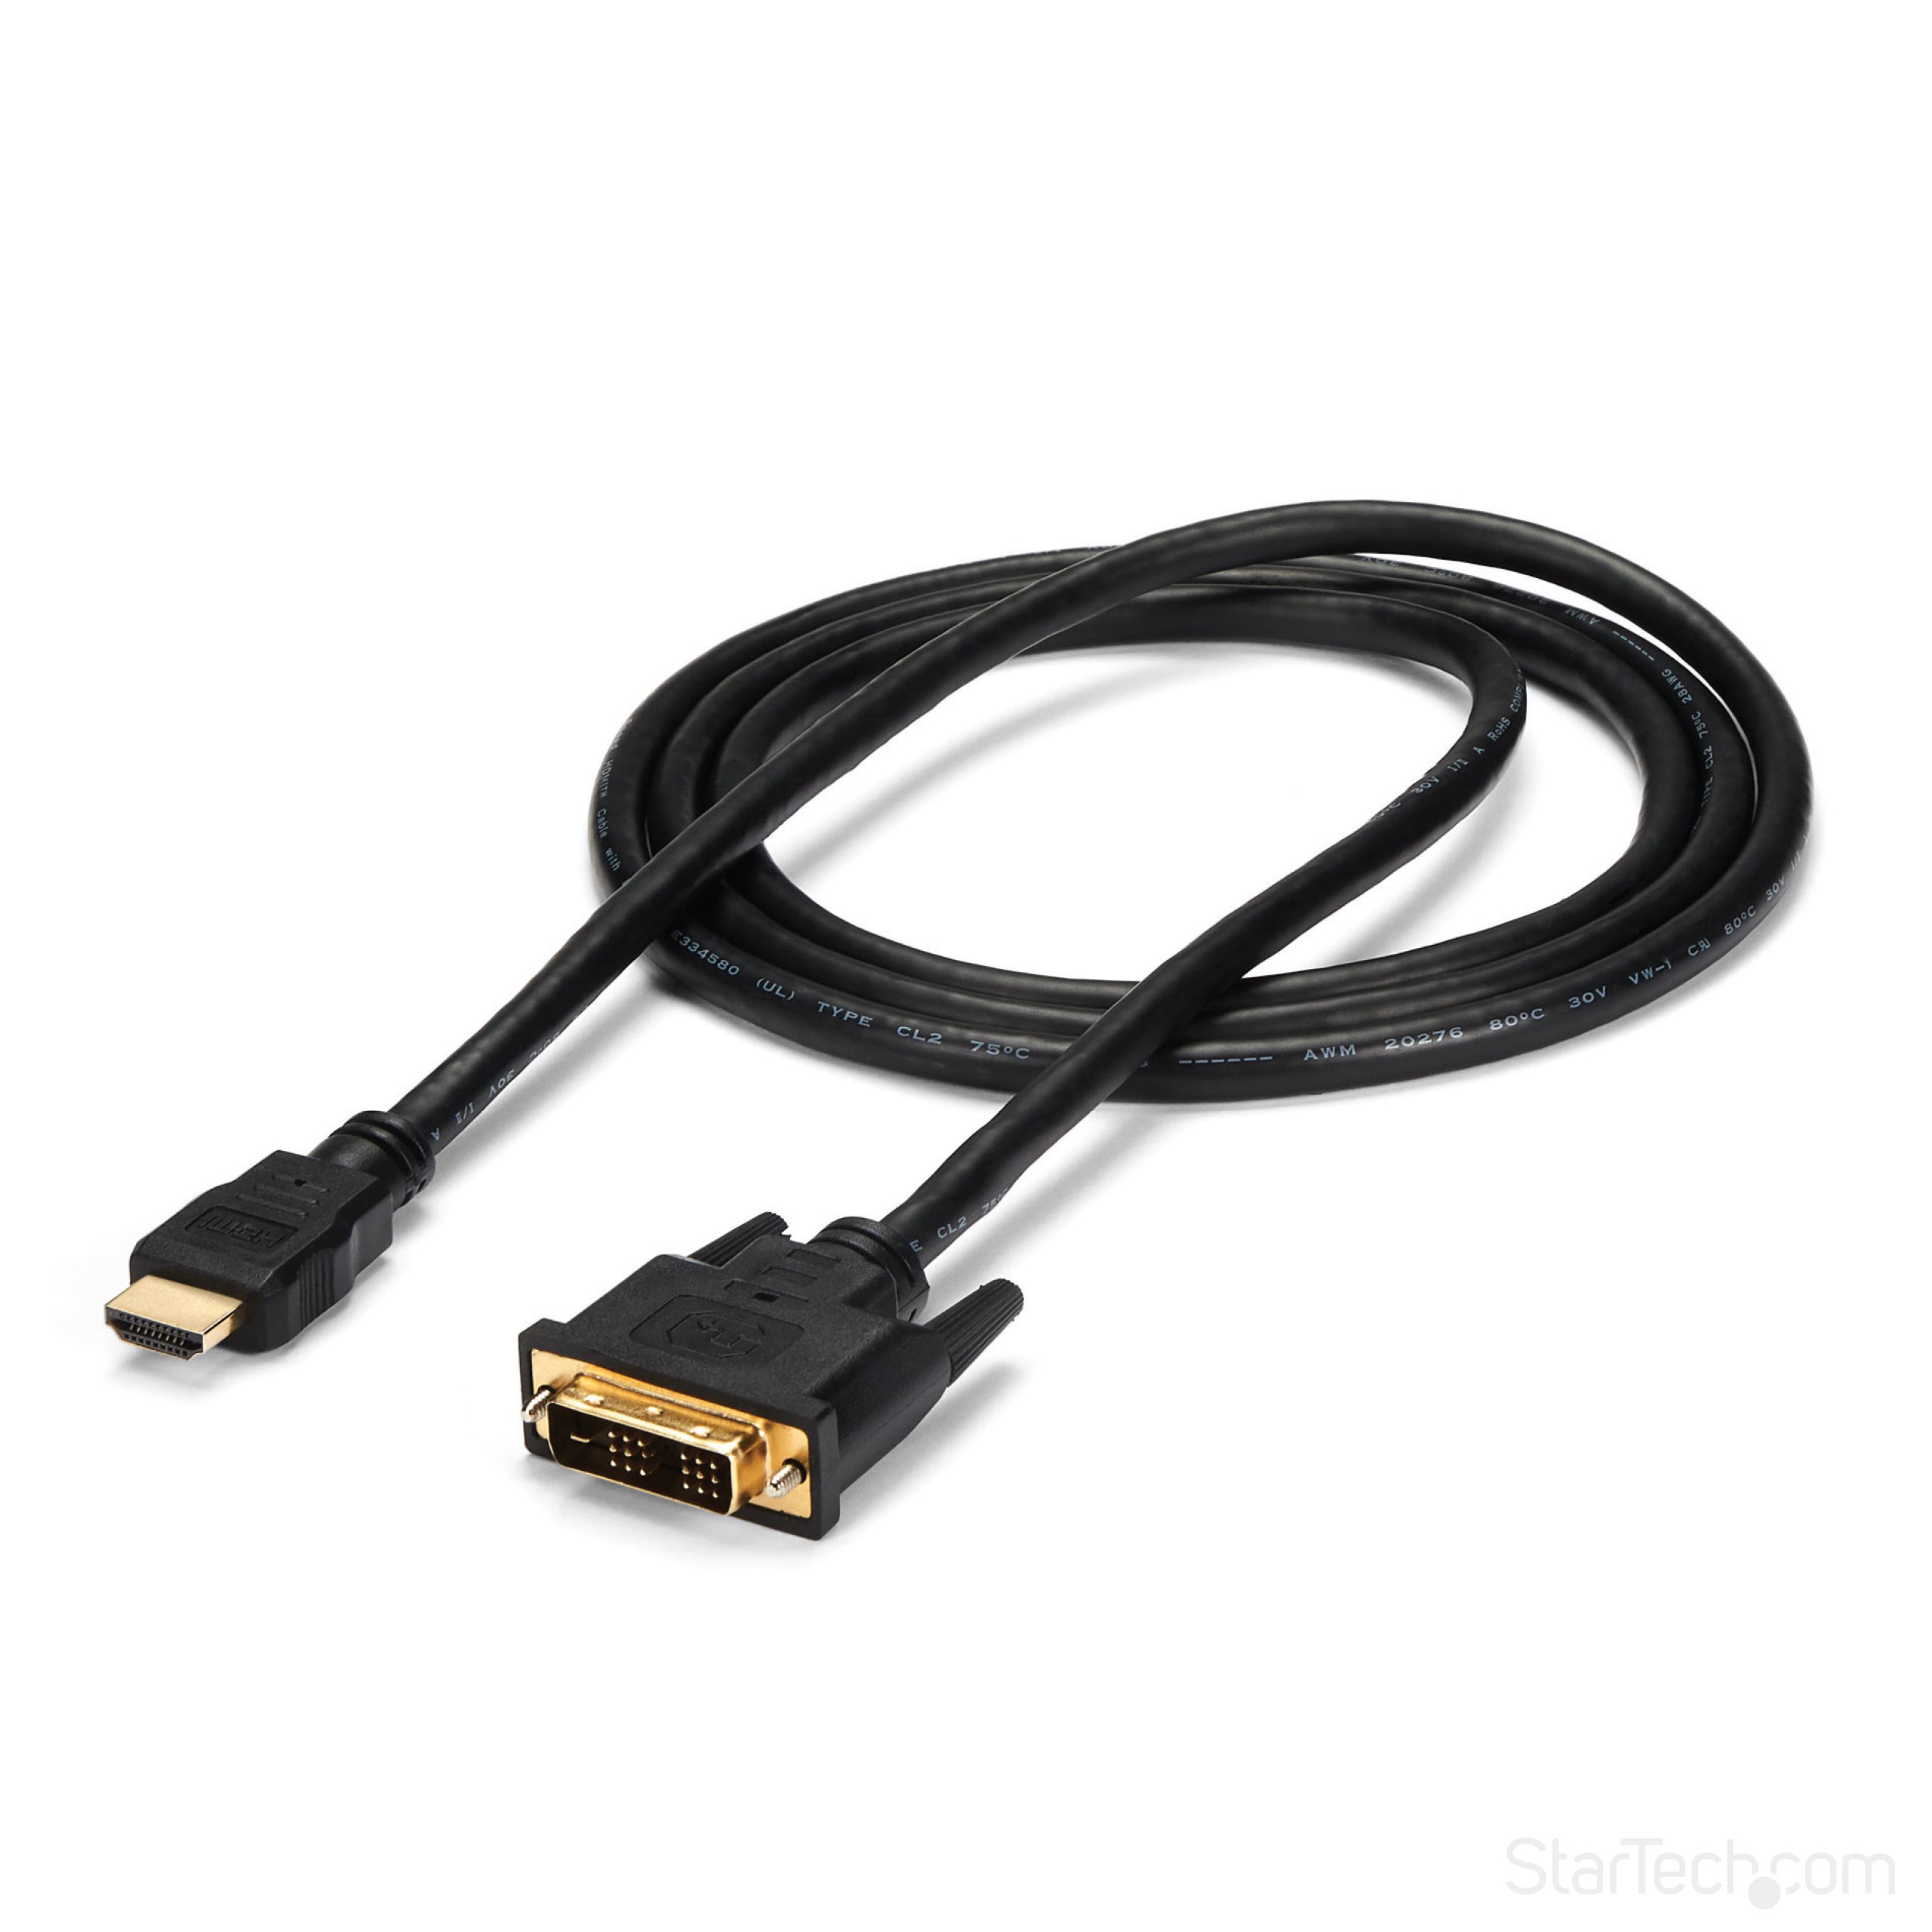 StarTech.com 6ft Mini DisplayPort to HDMI Cable - 4K 30hz Monitor Adapter  Cable - mDP PC or Macbook to HDMI Display (MDP2HDMM2MB) Black